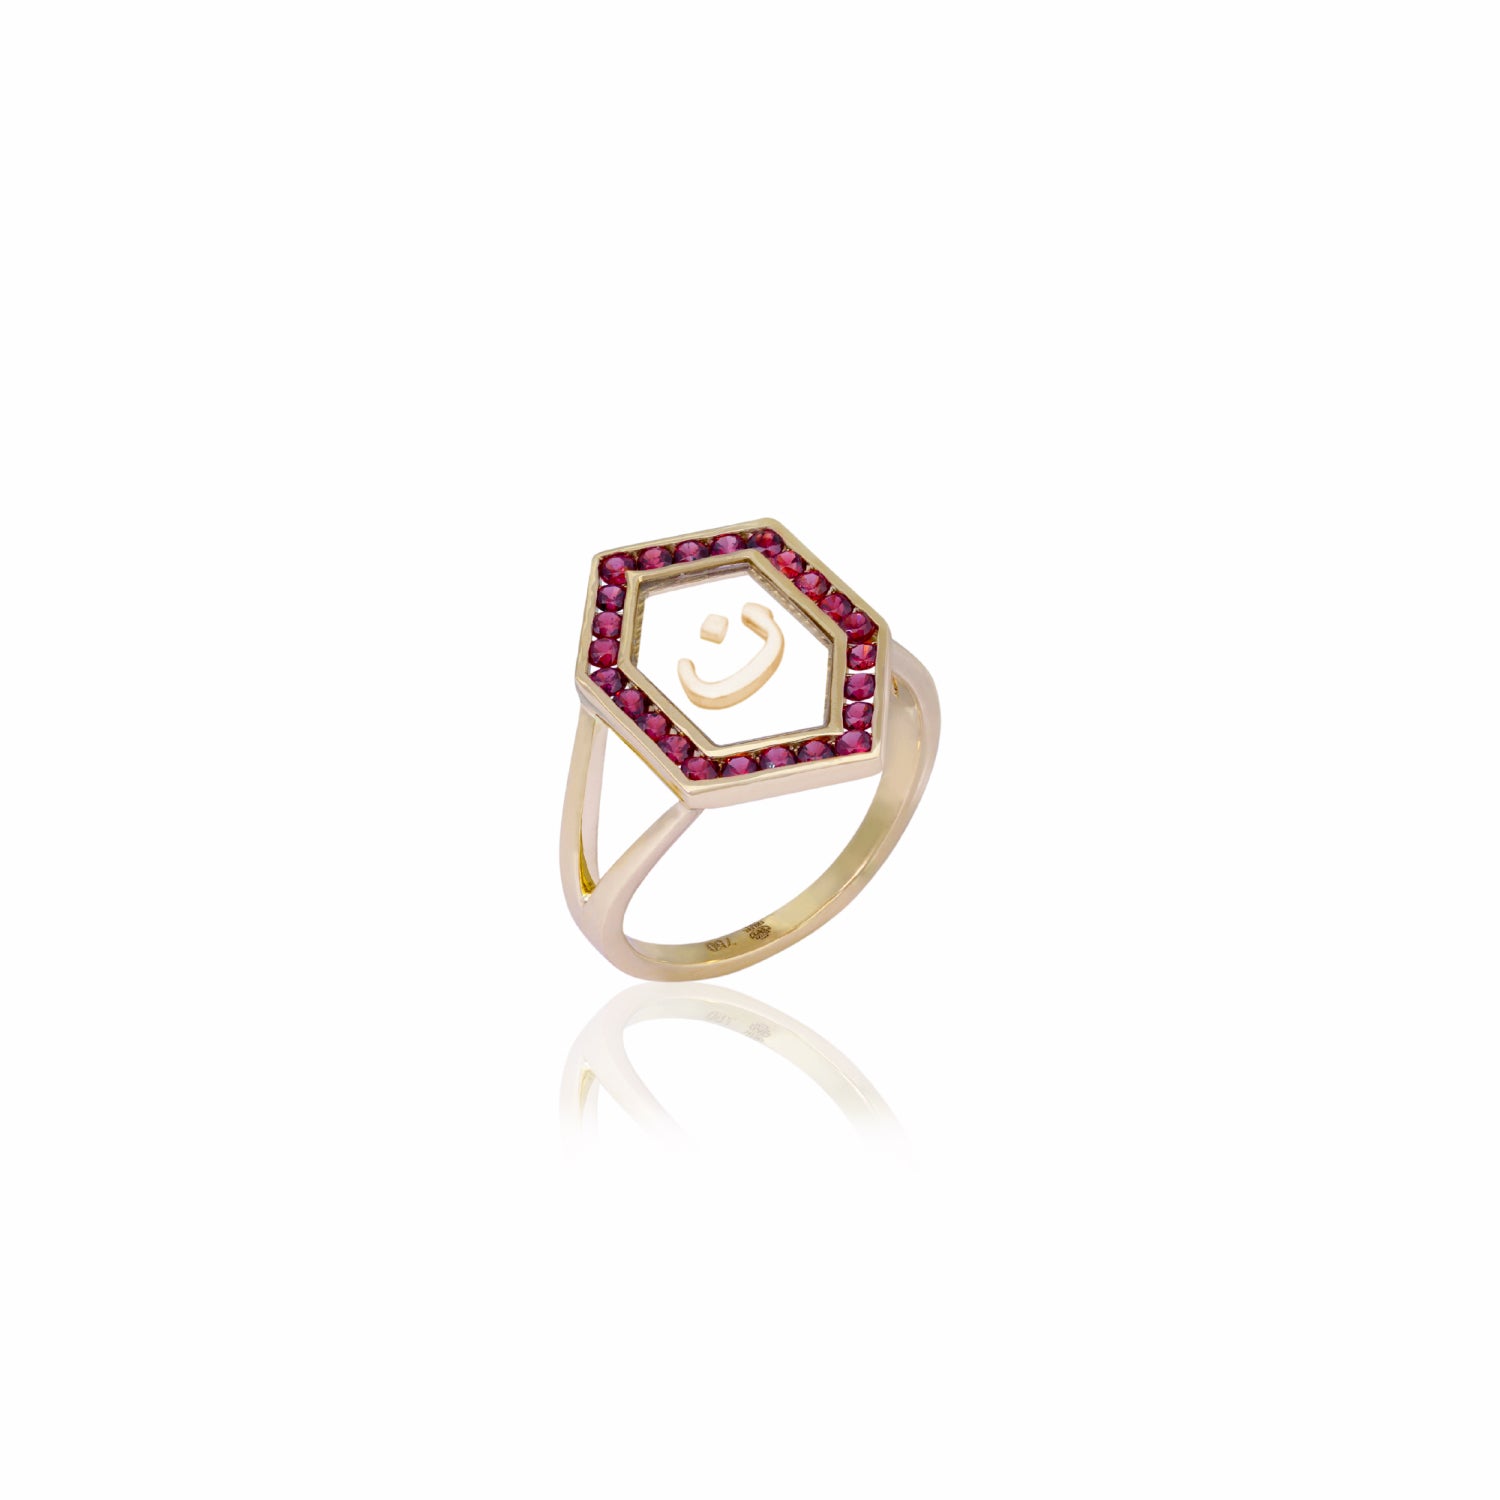 Qamoos 1.0 Letter ن Ruby Ring in Yellow Gold